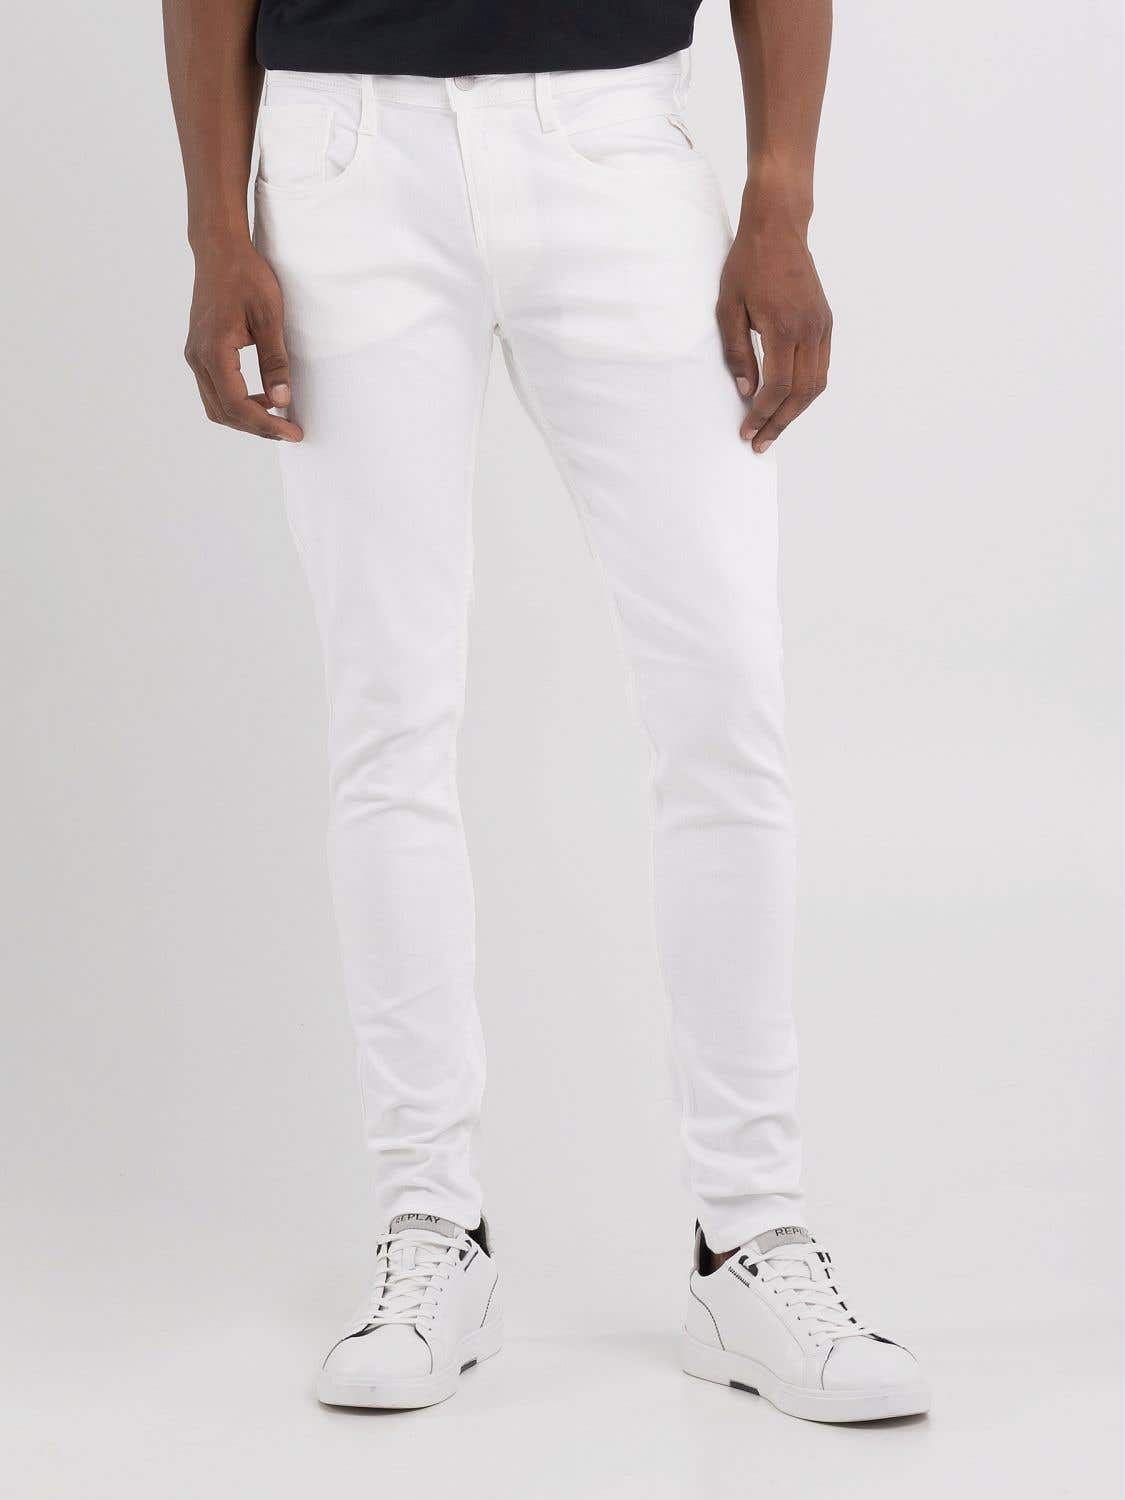 Replay Ma934 8005311 Jeans White